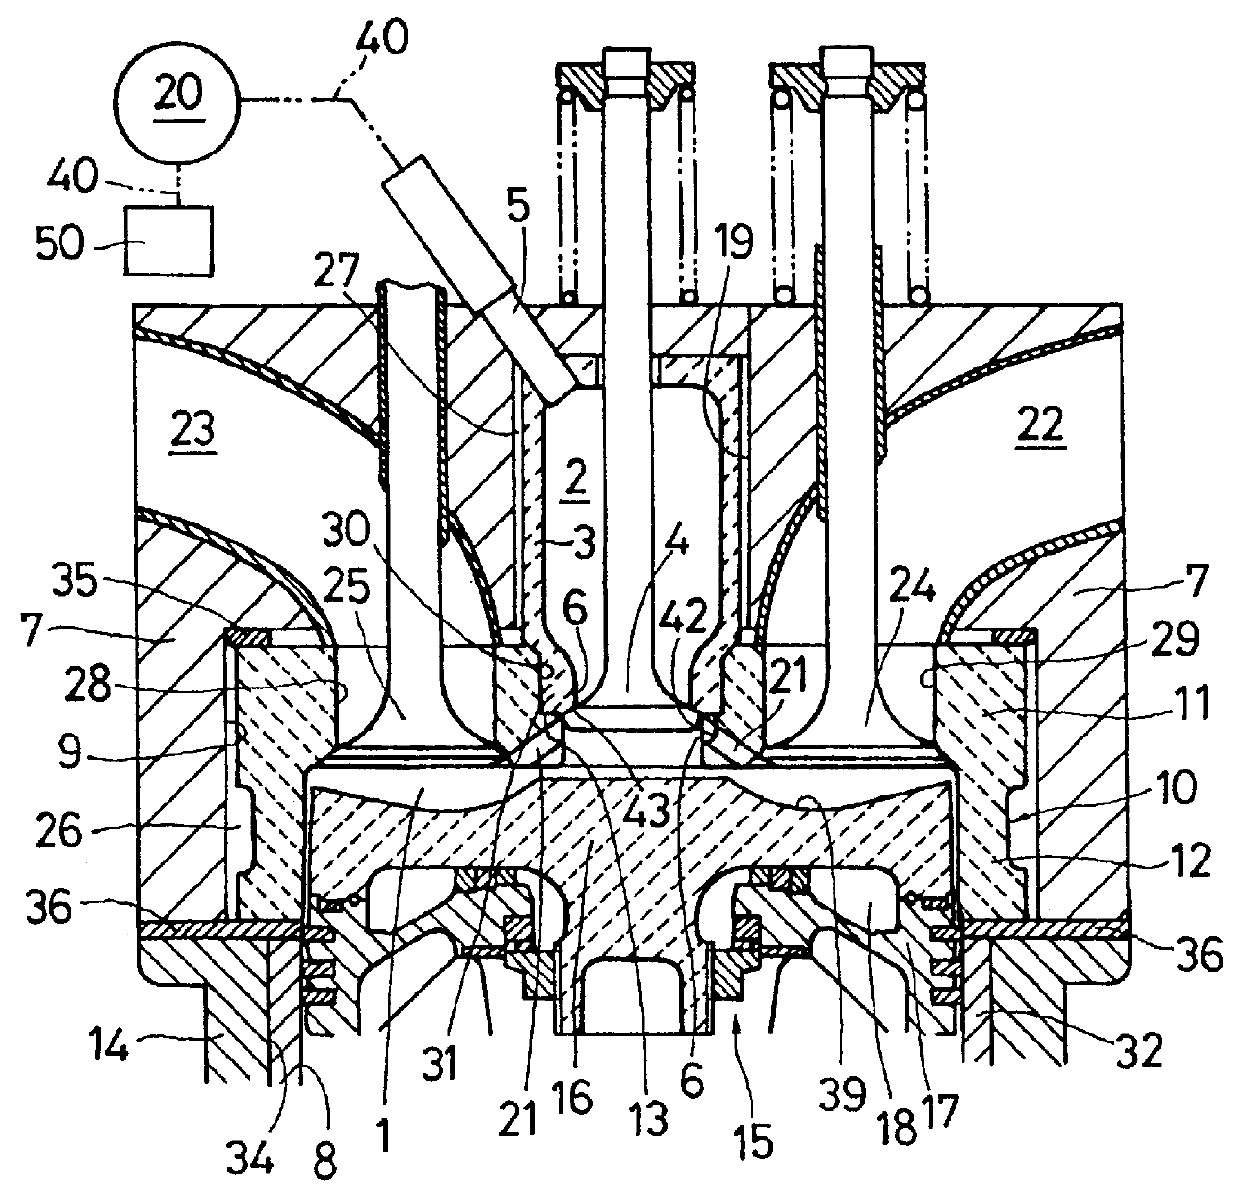 Gas engine with pre-combustion chamber